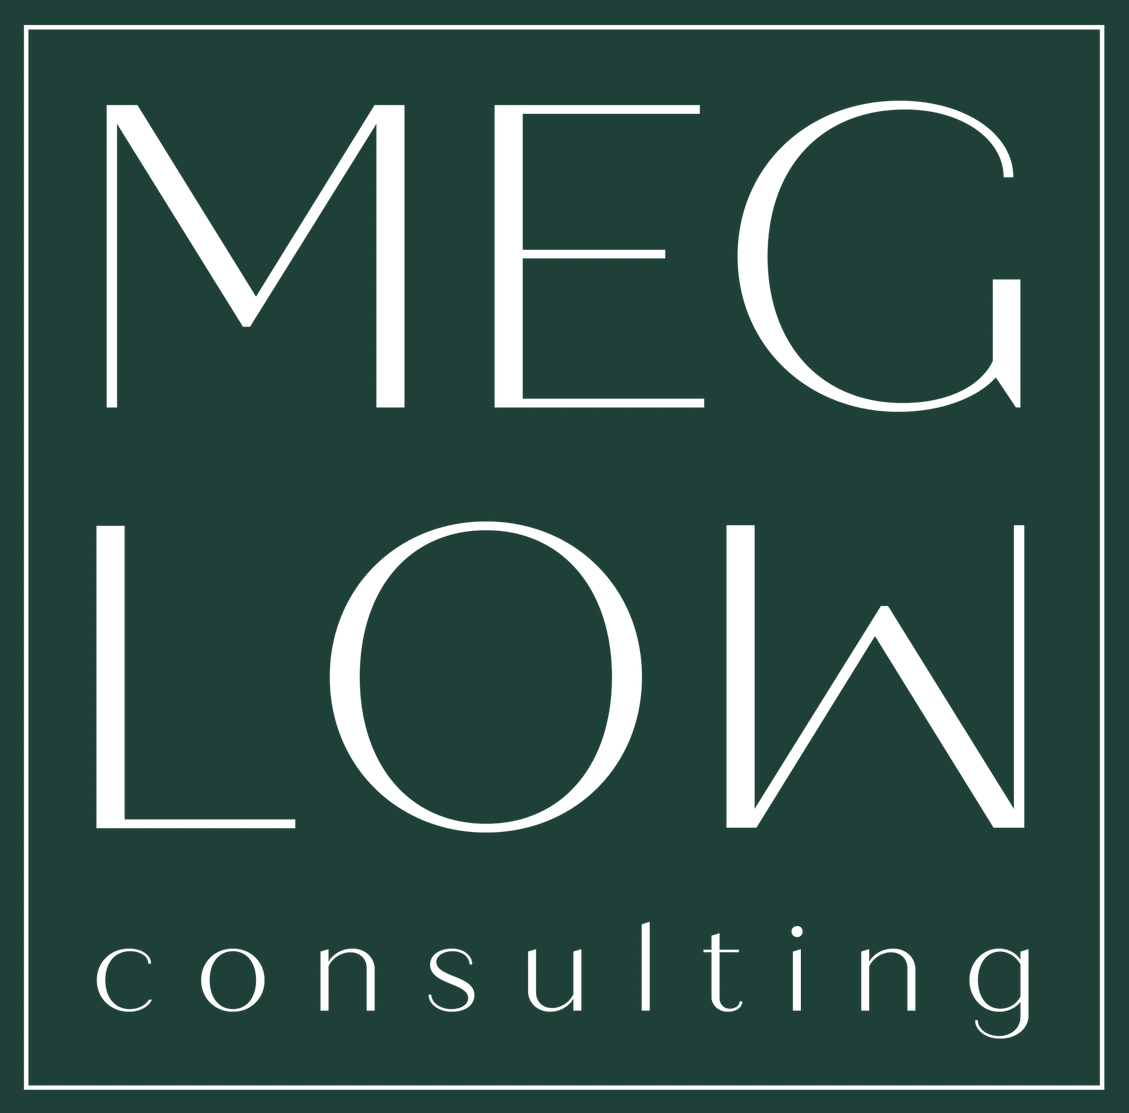 Meglow Consulting